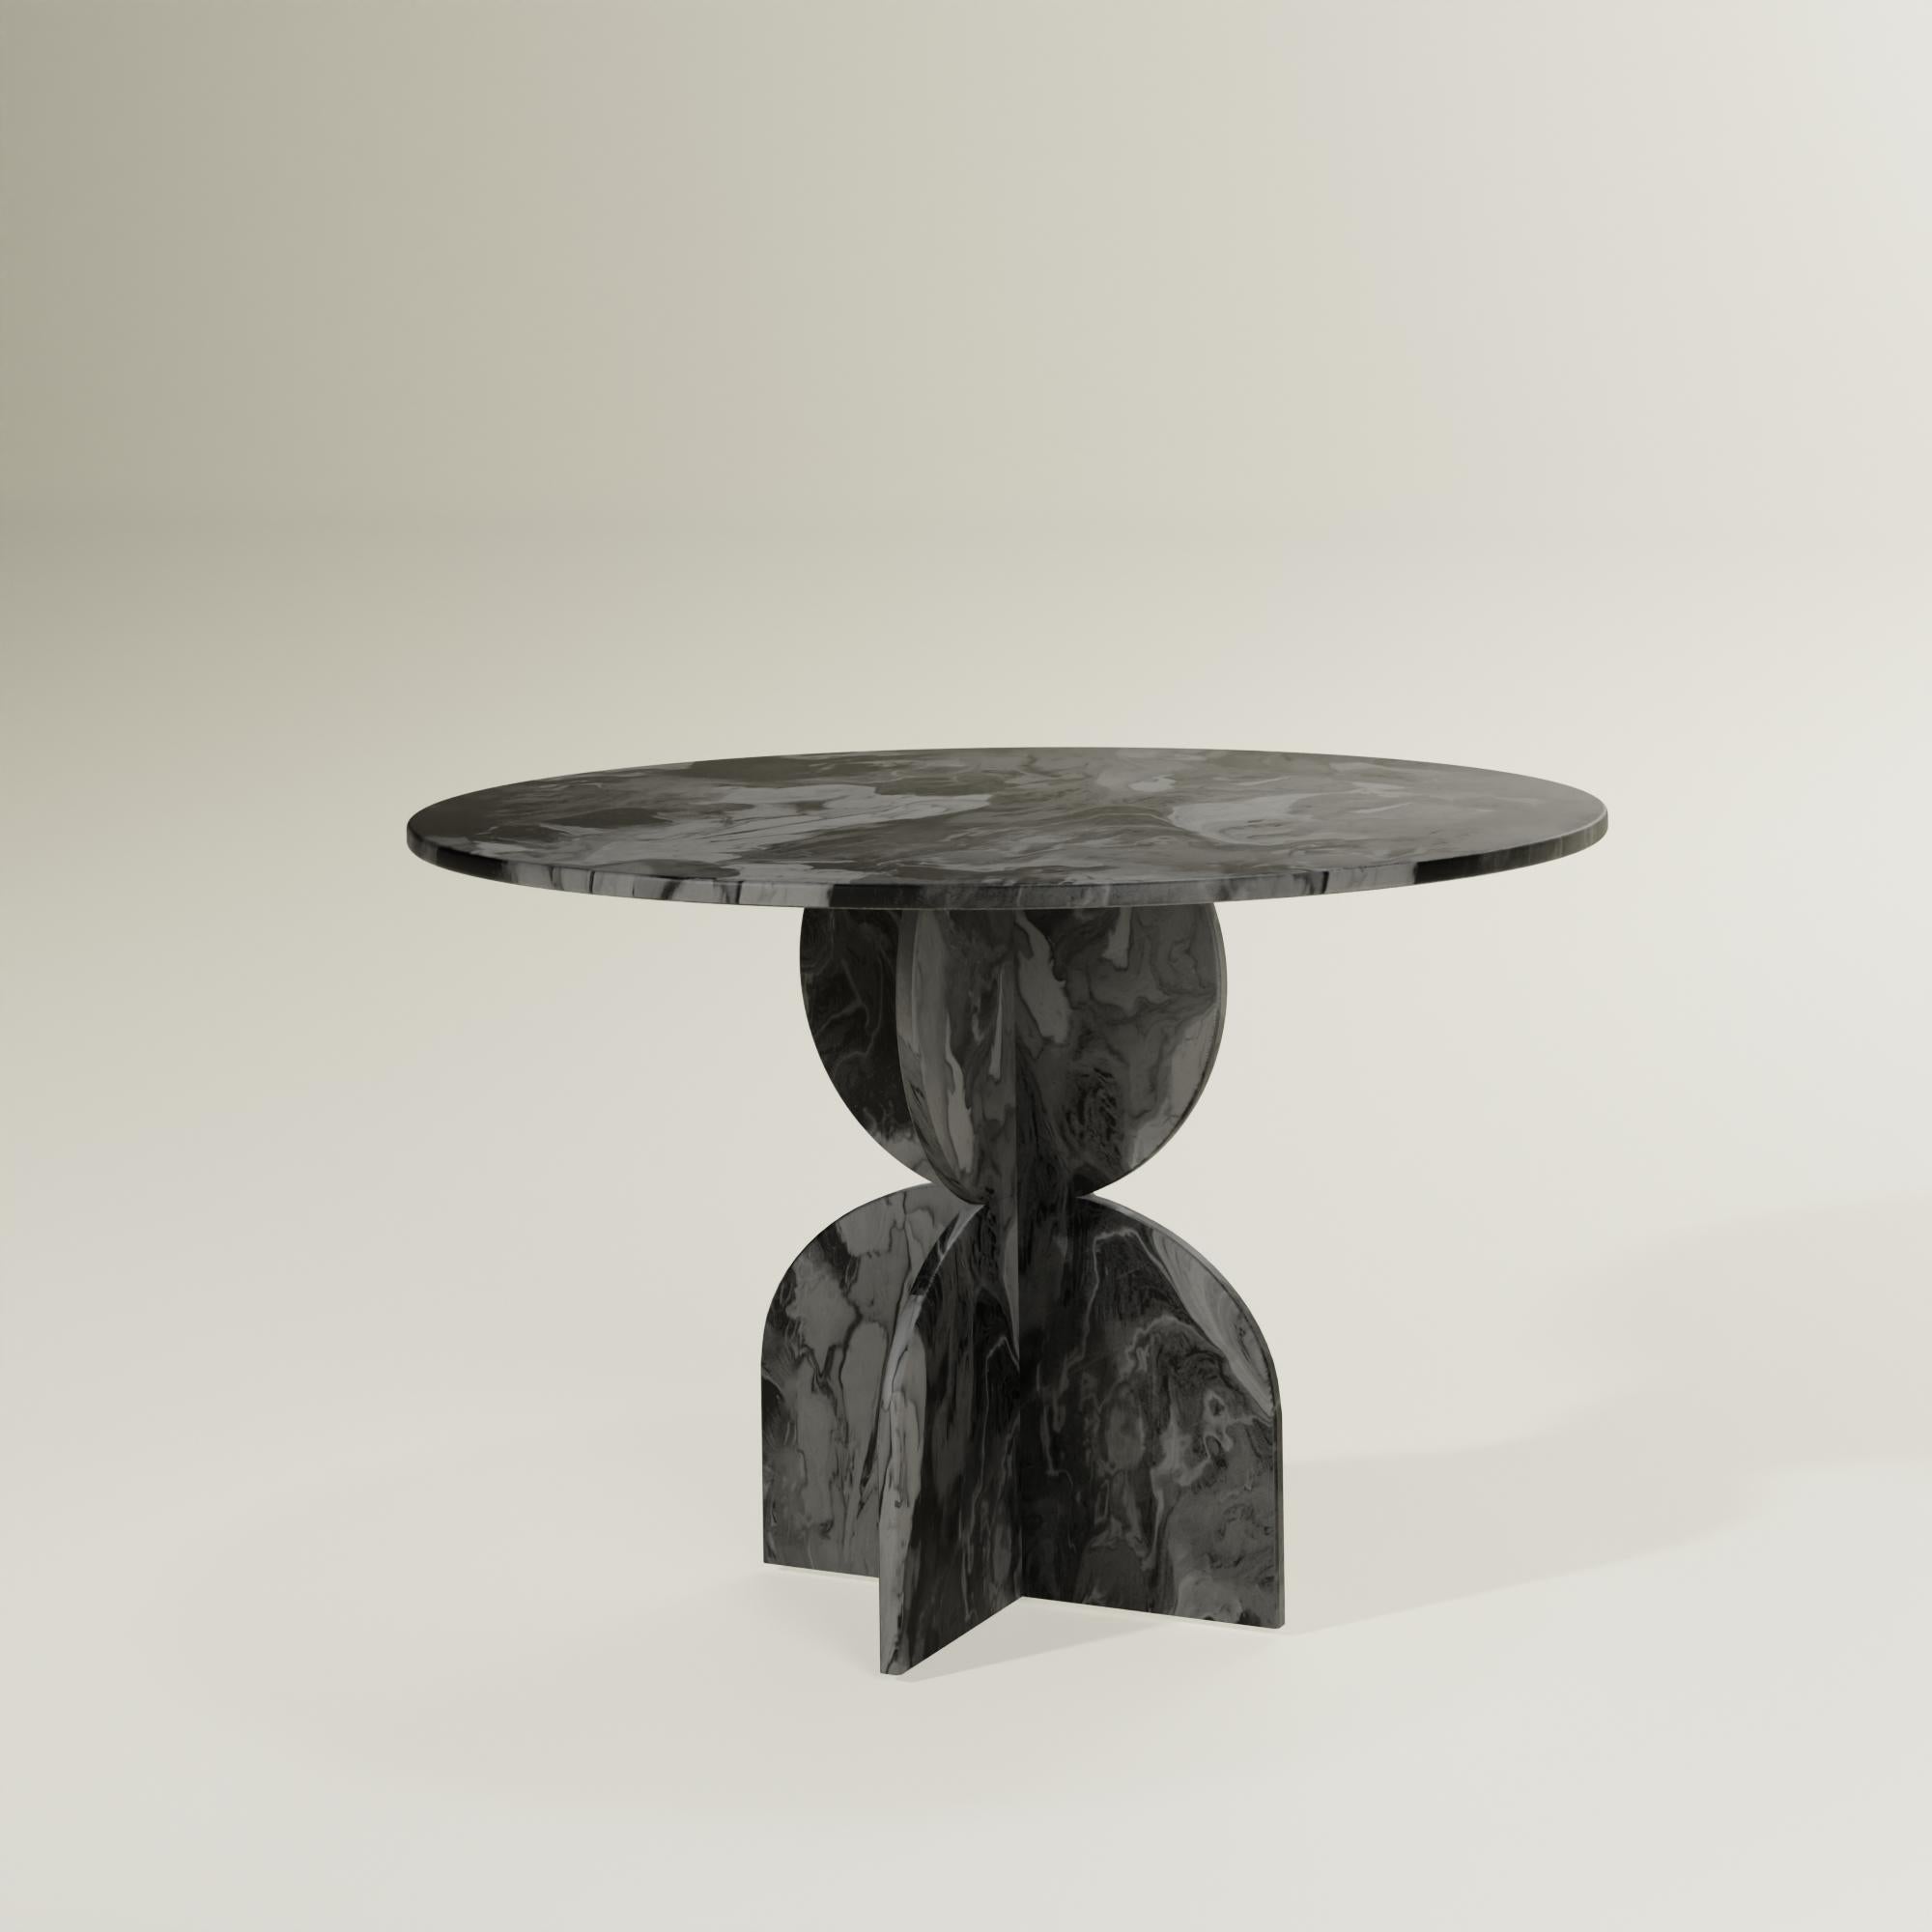 Contemporary black round table handcrafted 100% Recycled Plastic by Anqa Studios
Incredible conversations happen around incredible tables. ANQA Studios round table is a geometrically shaped table with a design inspired by the brutalist architecture